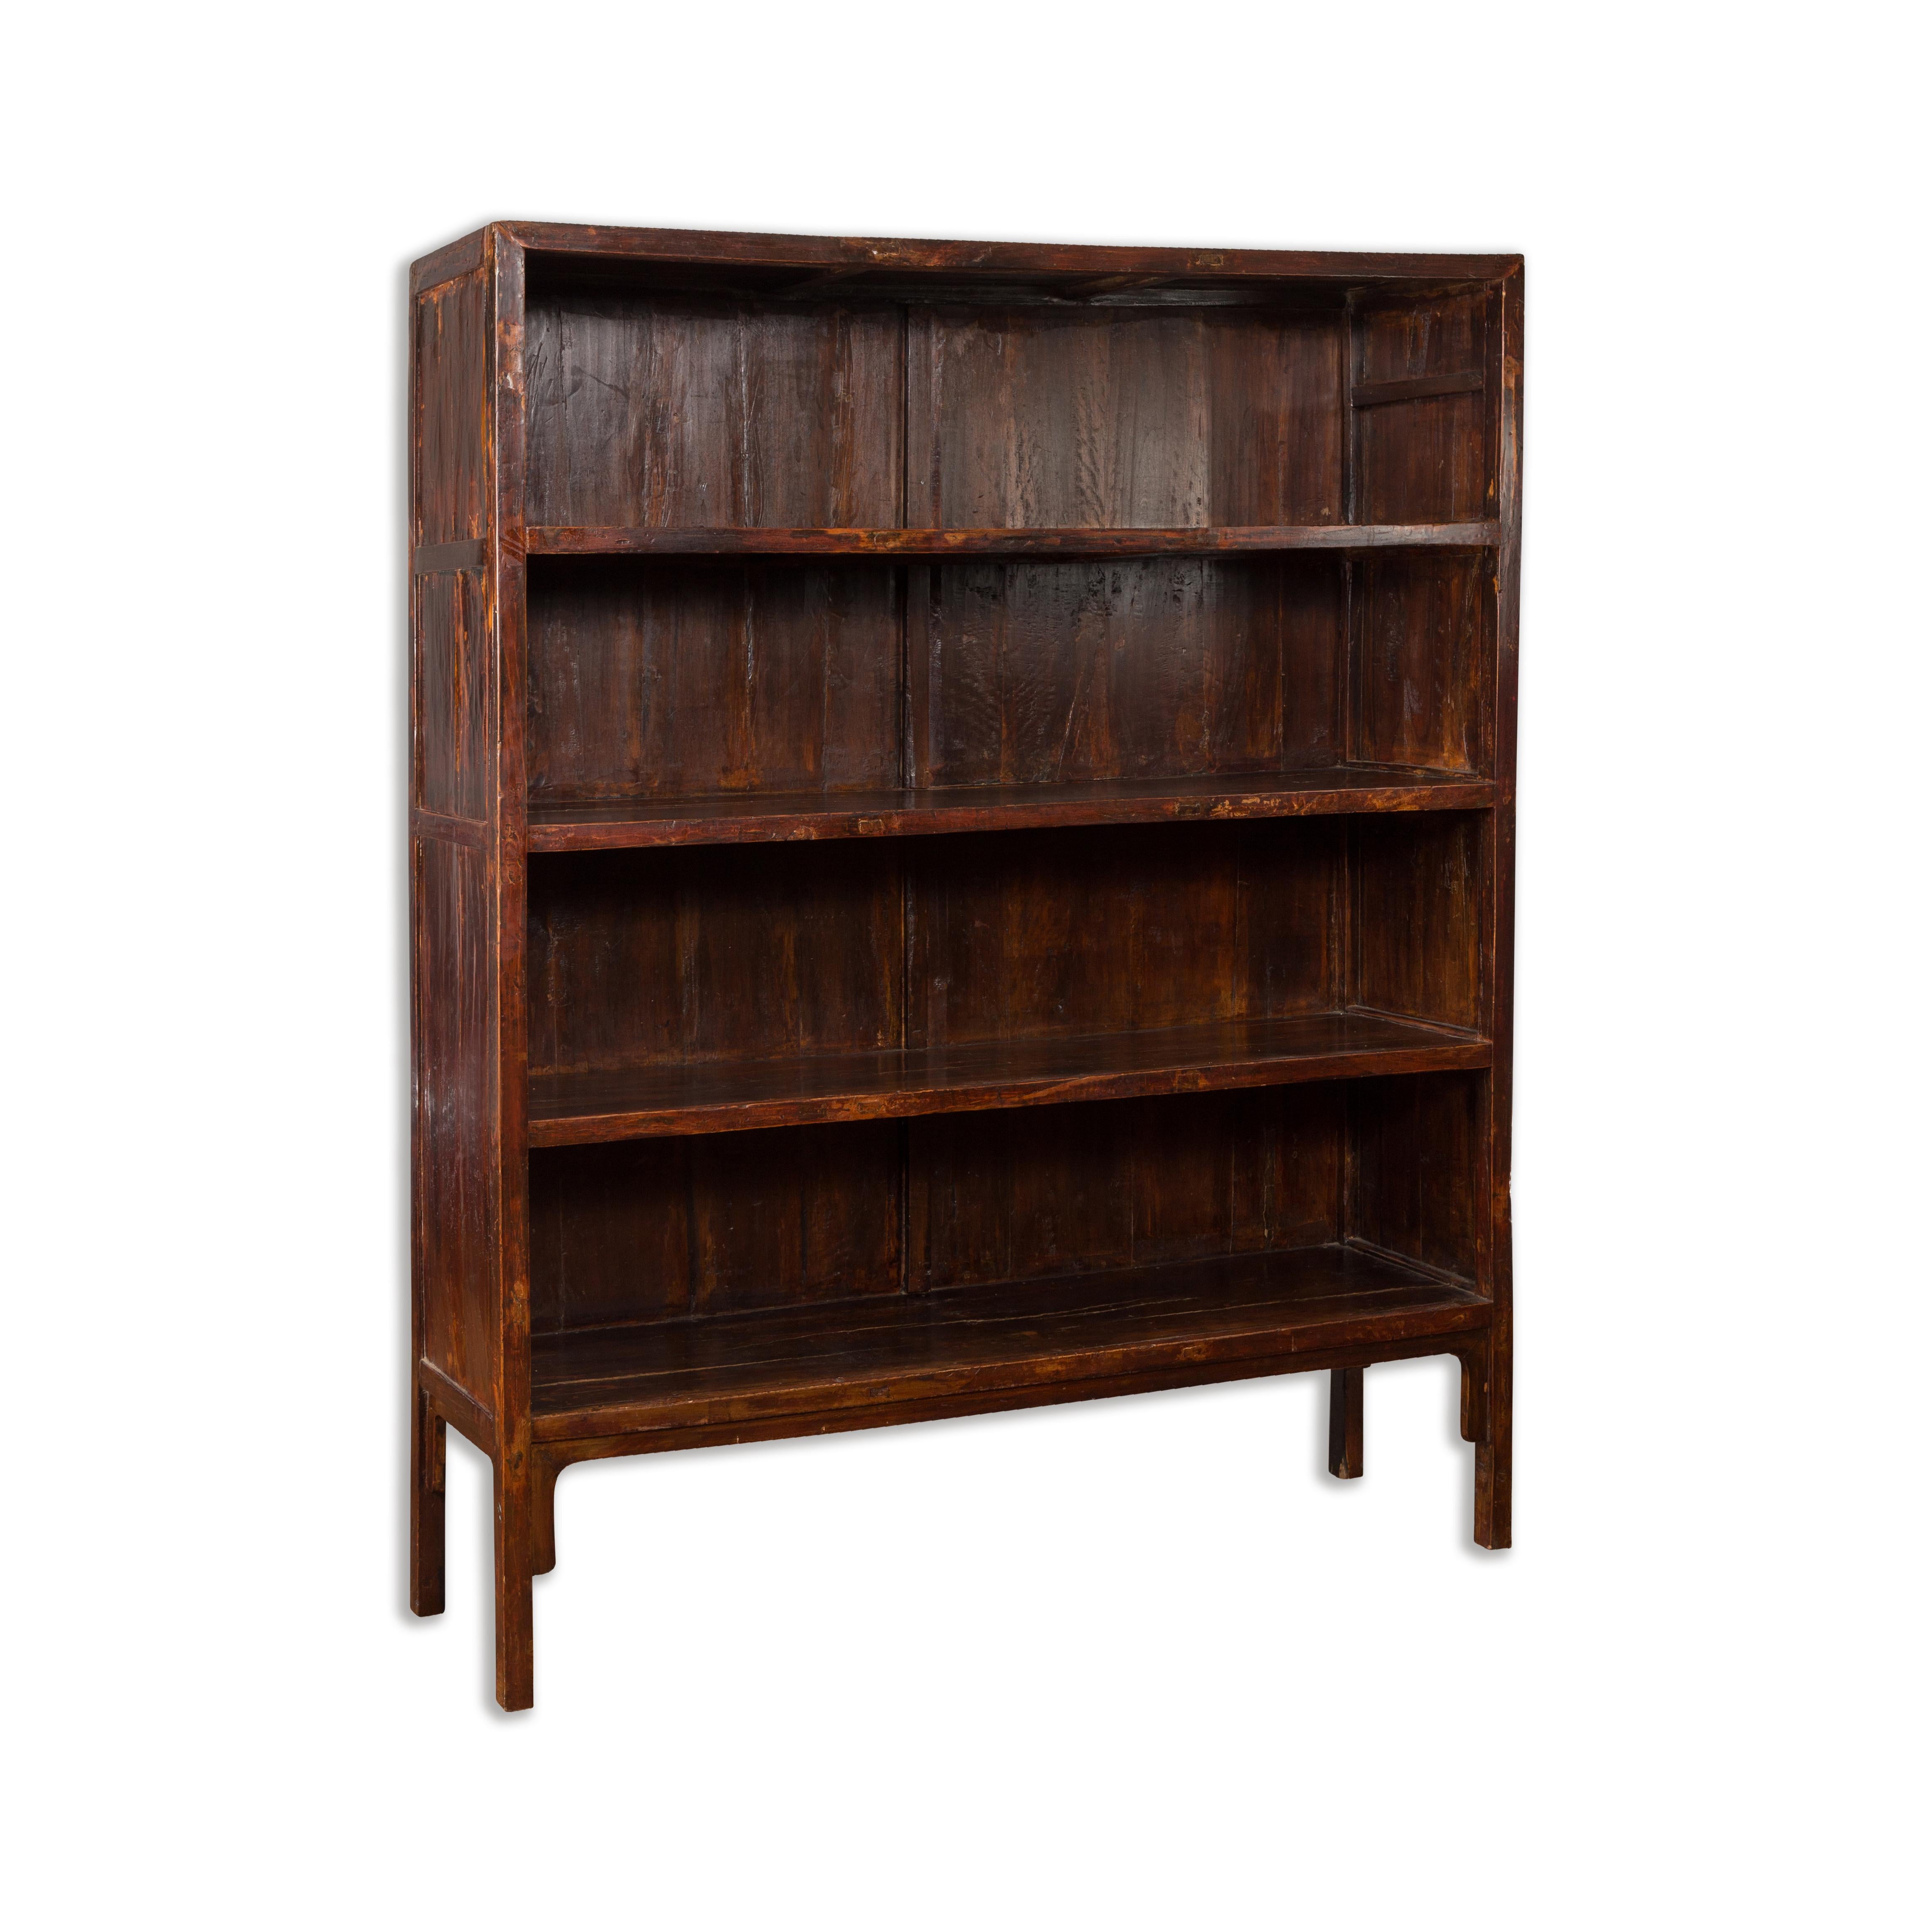 Chinese Qing Dynasty 19th Century Bookcase with Four Shelves and Dark Patina For Sale 9